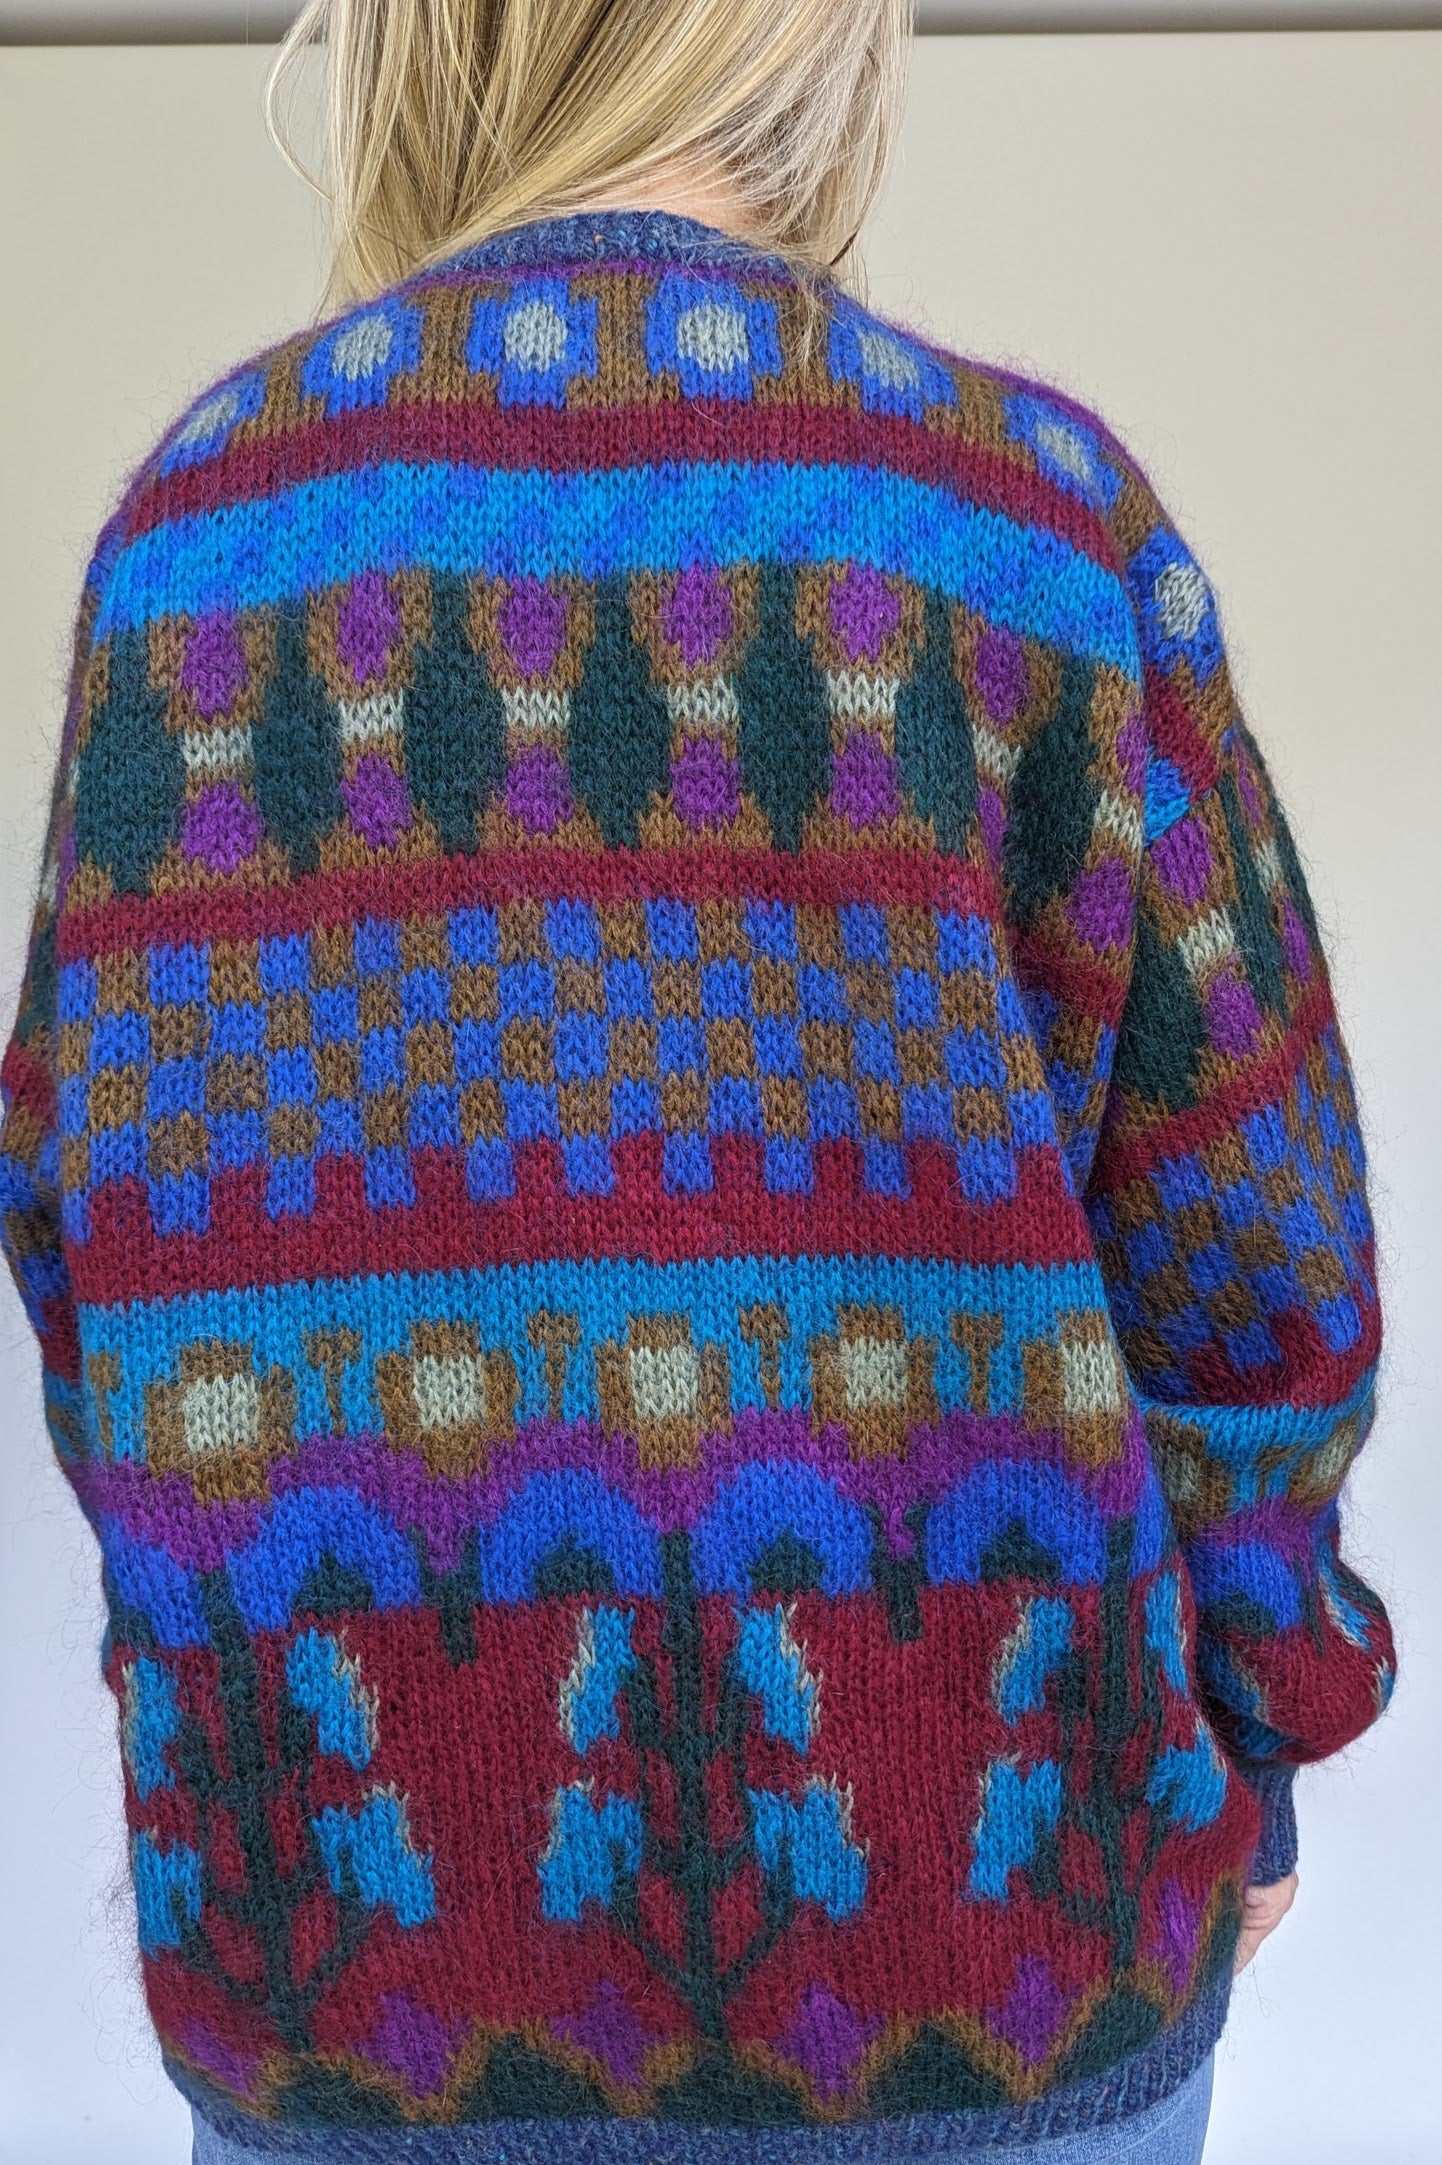 Patterned 90s cardigan